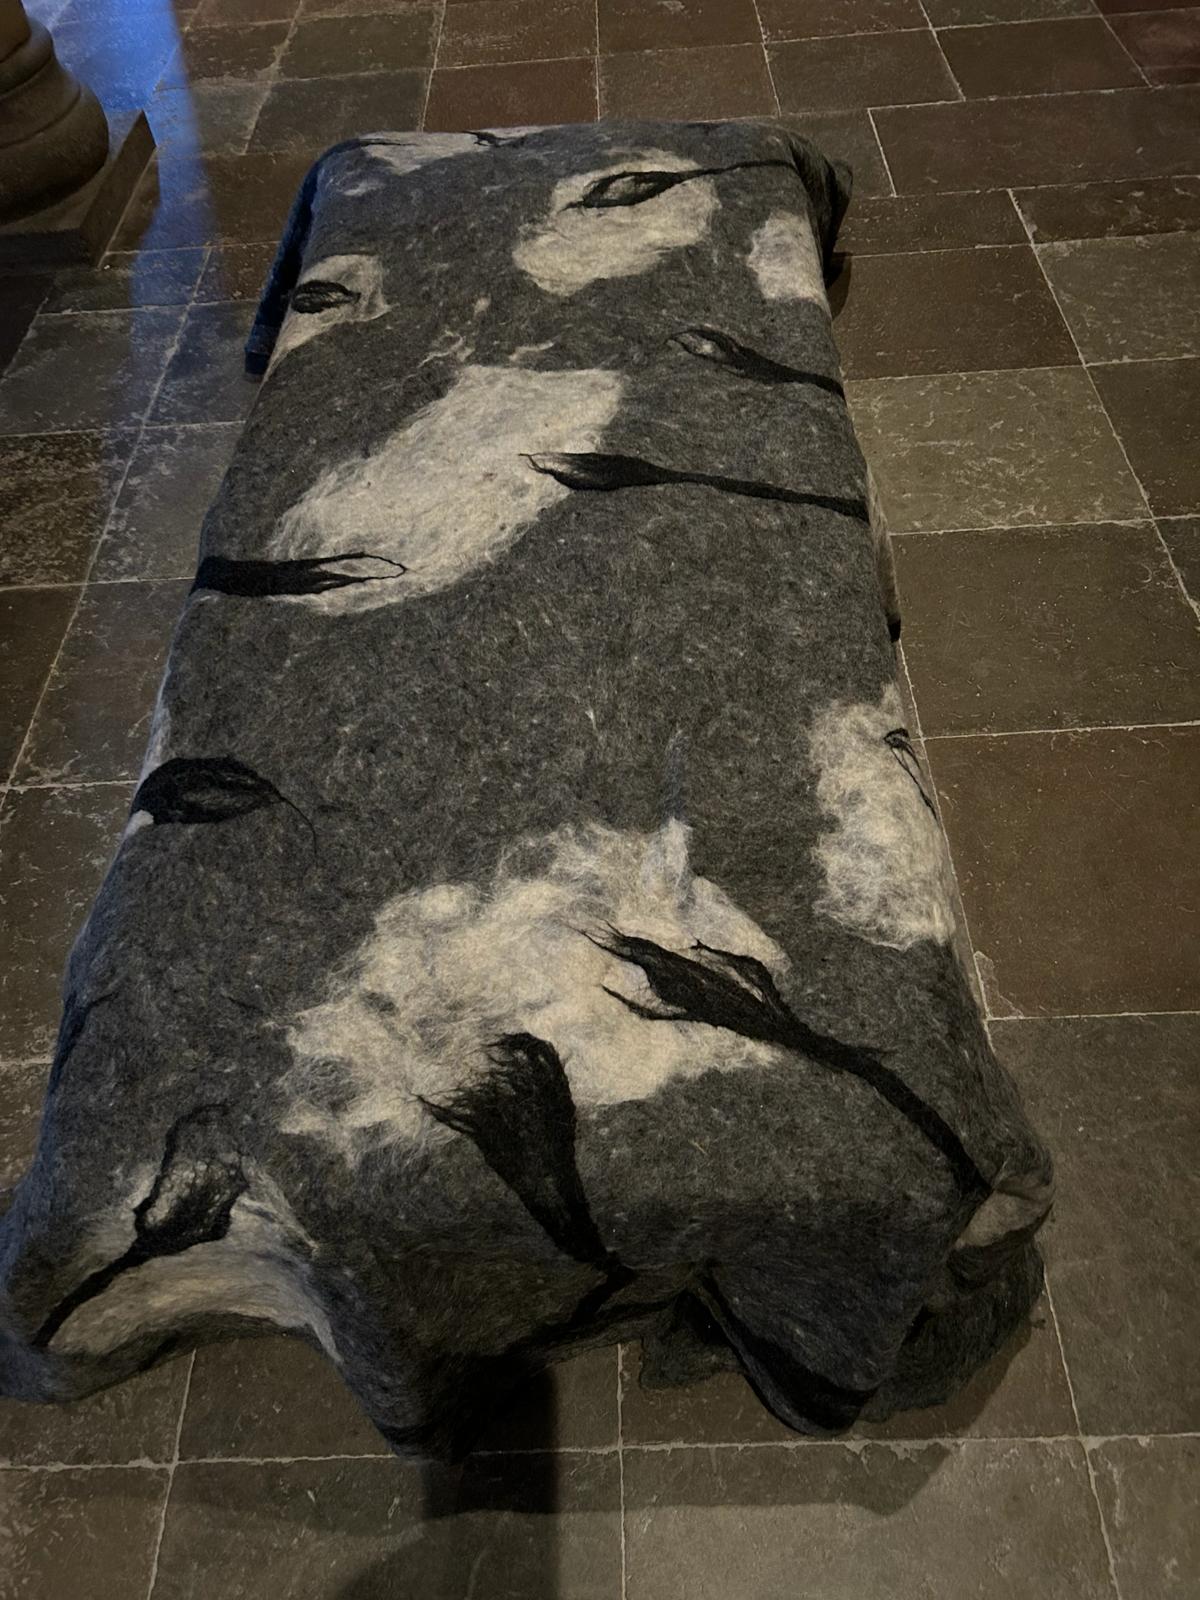 A bed made from felted wool in the crypt depicting looking up to see branches and clouds.